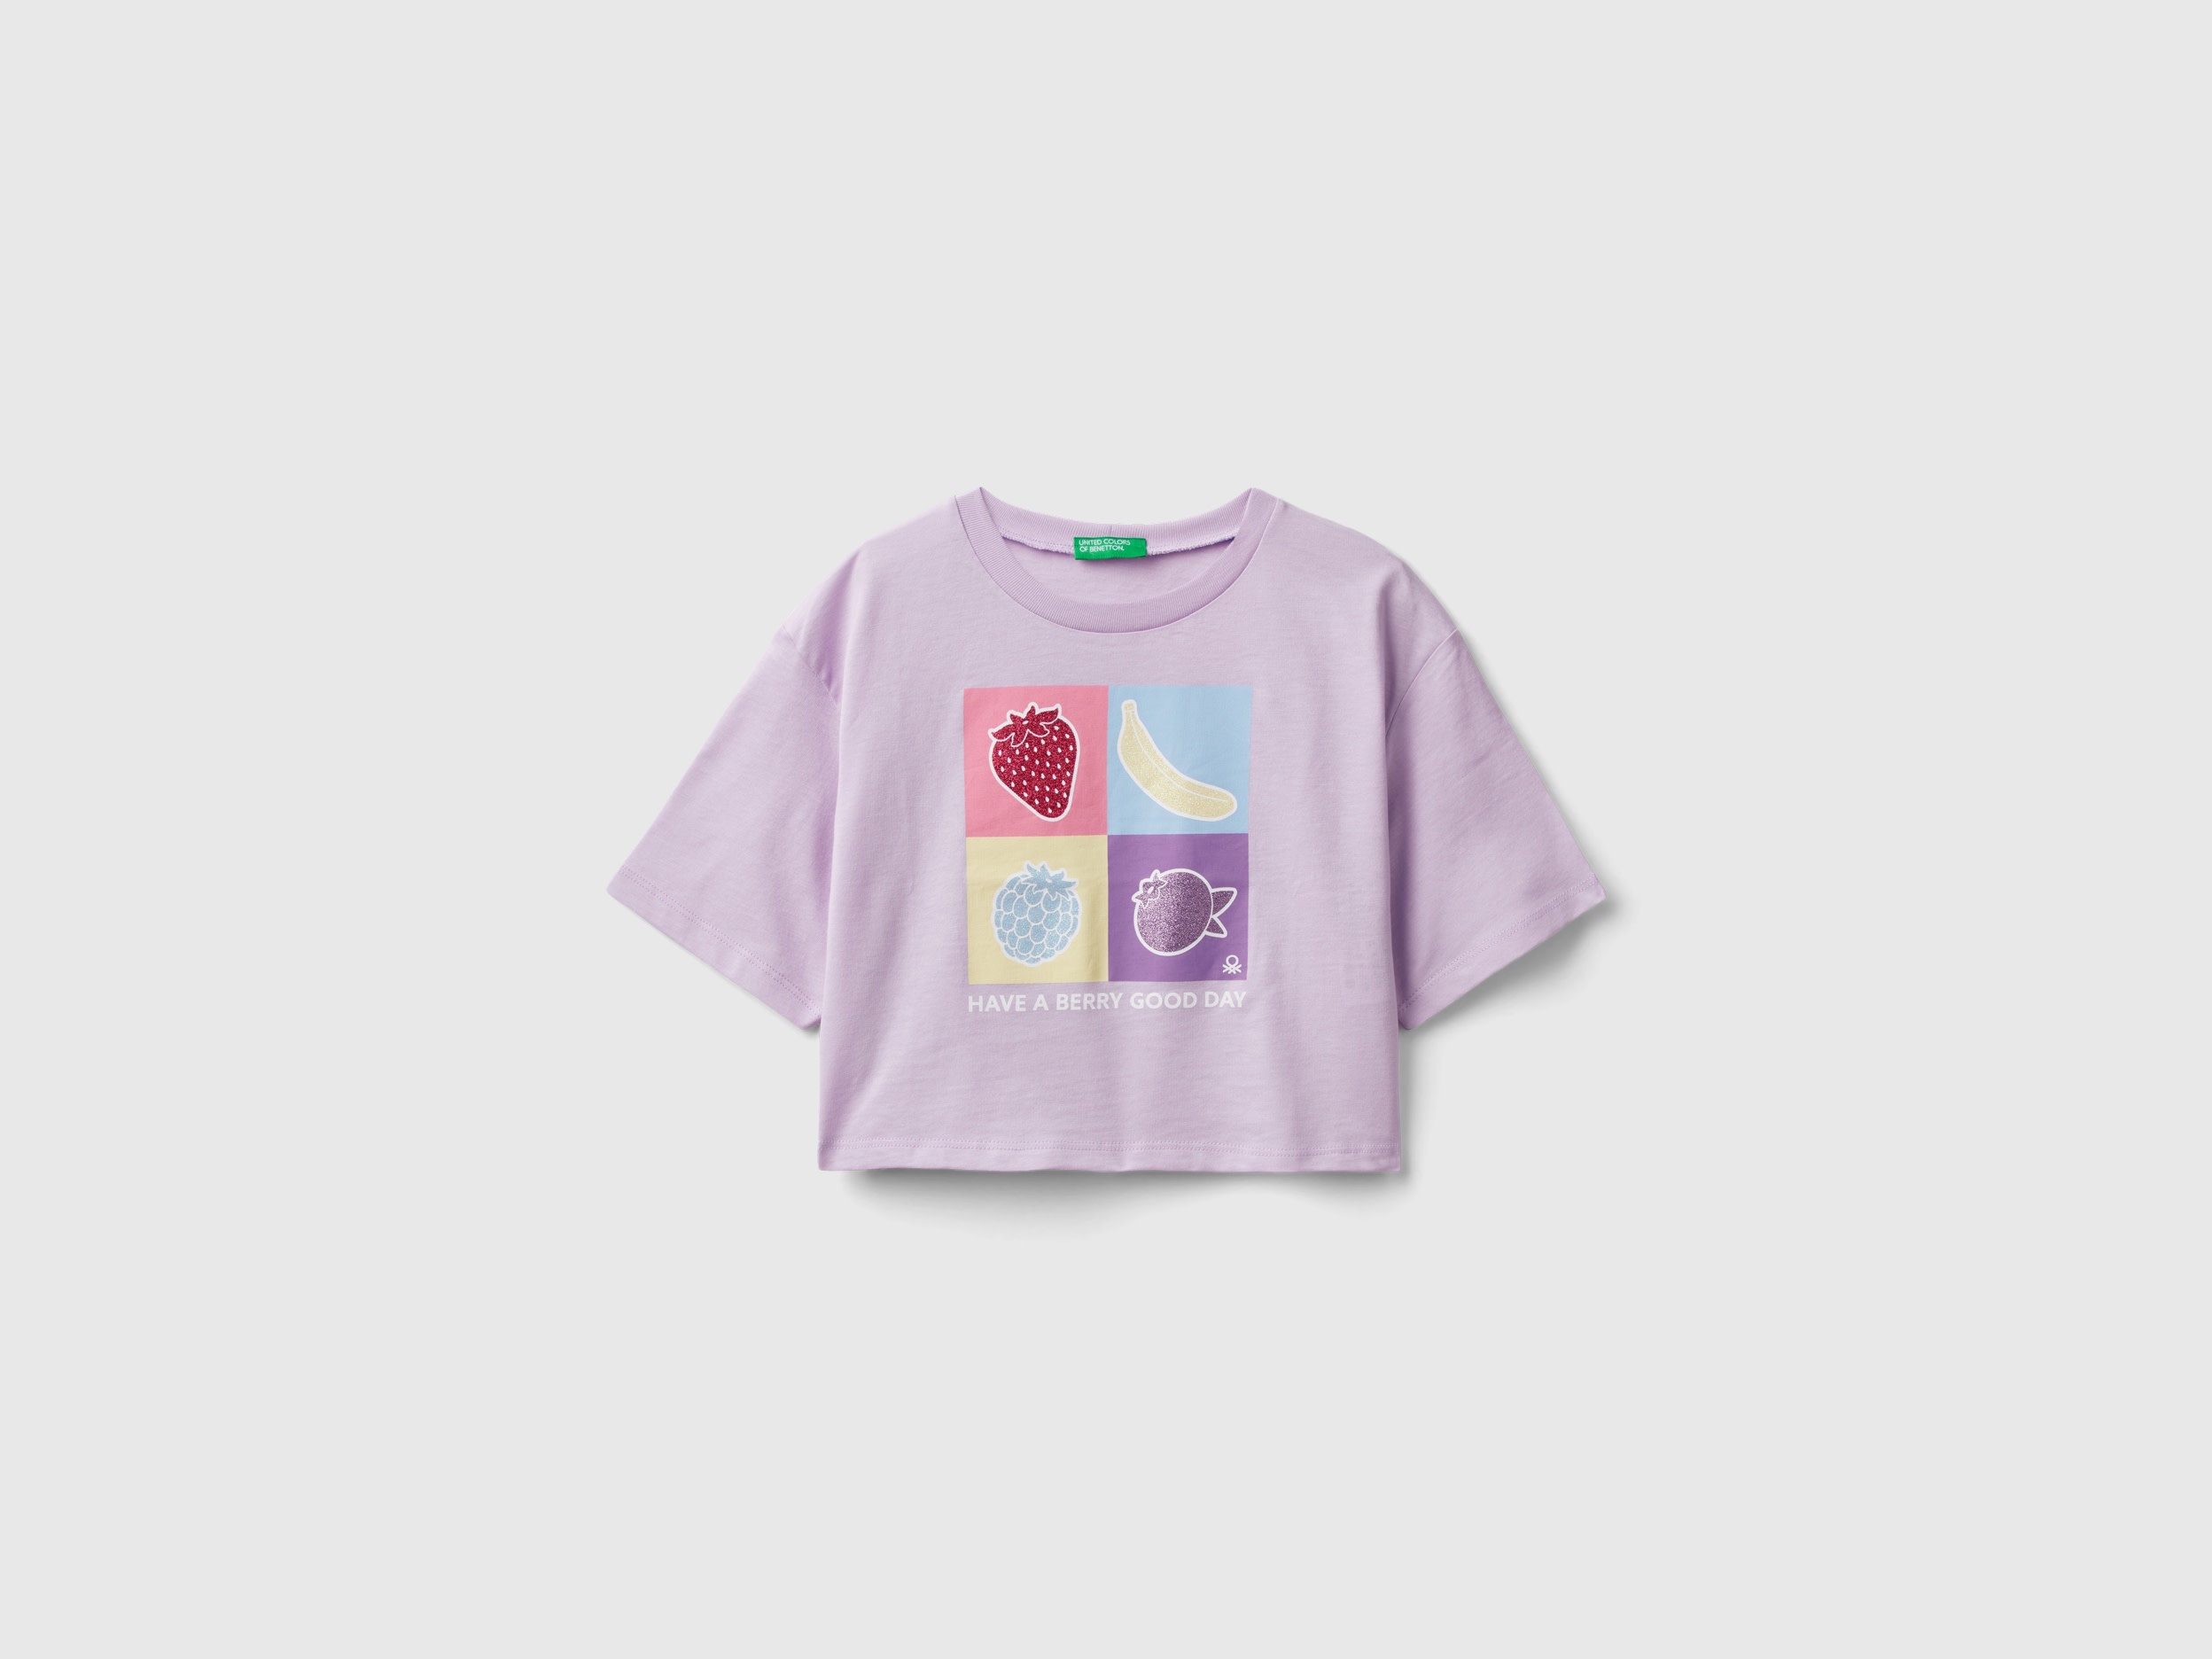 Image of Benetton, T-shirt With Glittery Print, size 2XL, Lilac, Kids